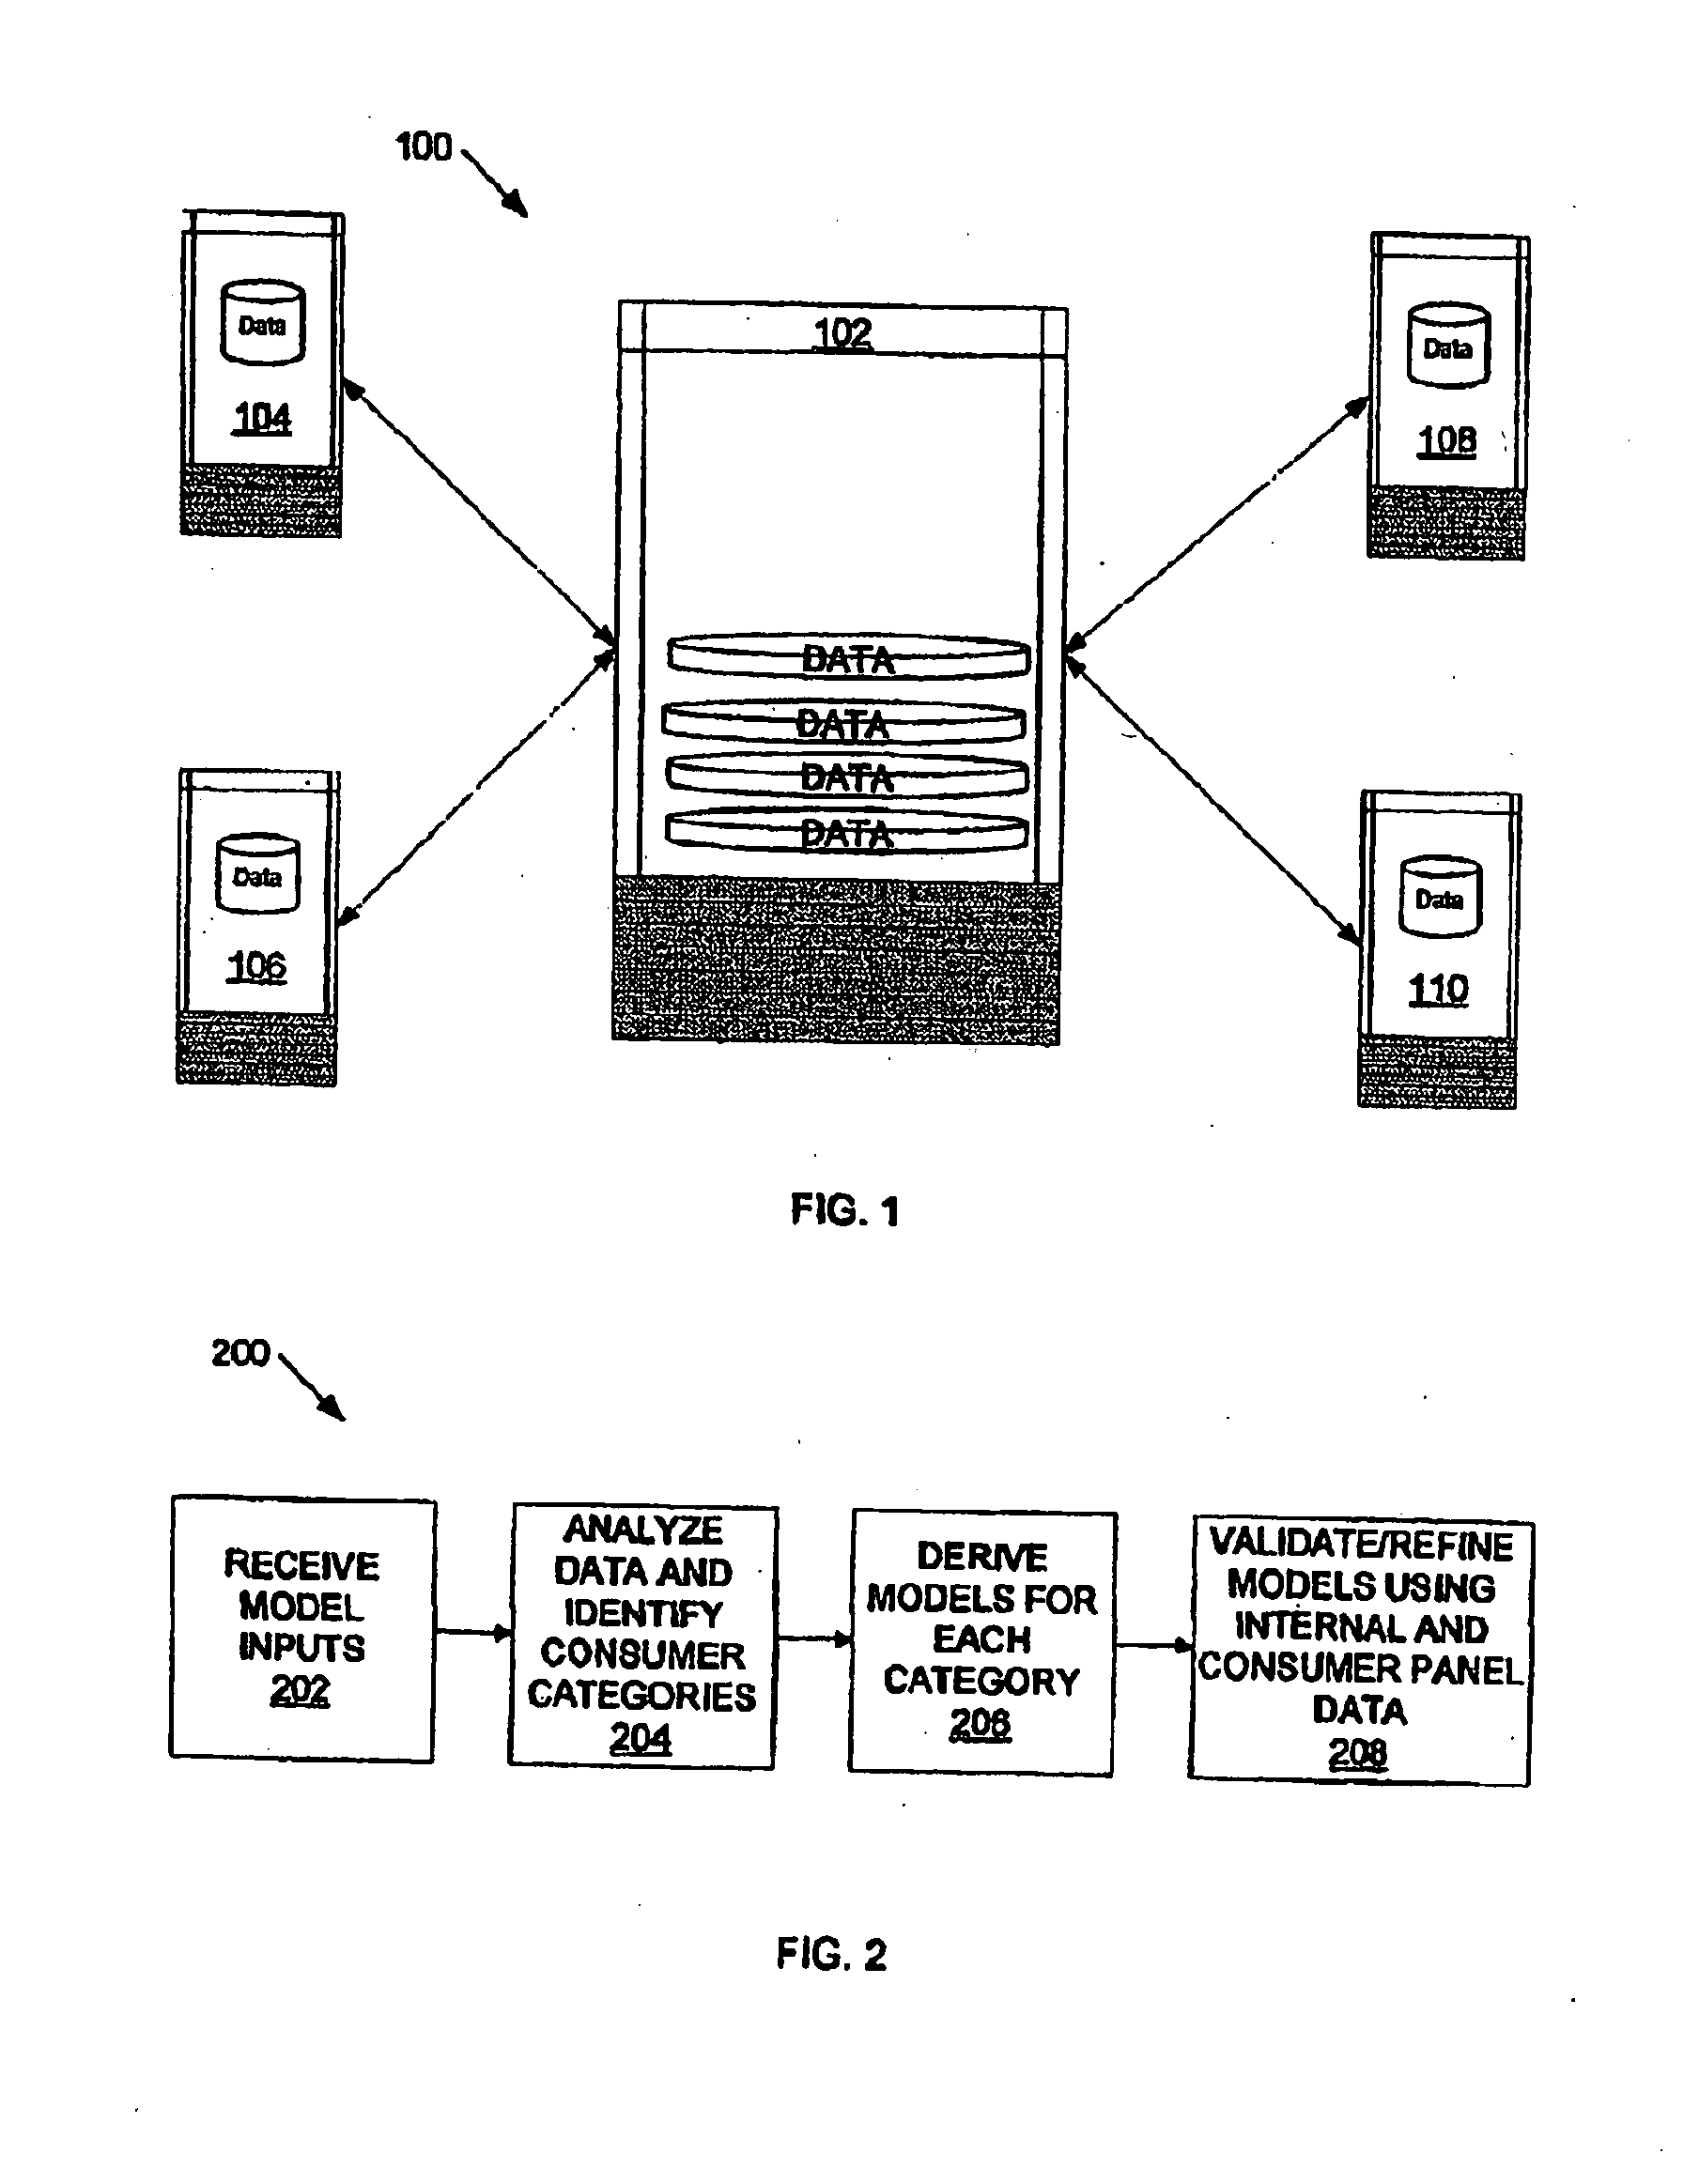 Method and apparatus for targeting best customers based on spend capacity